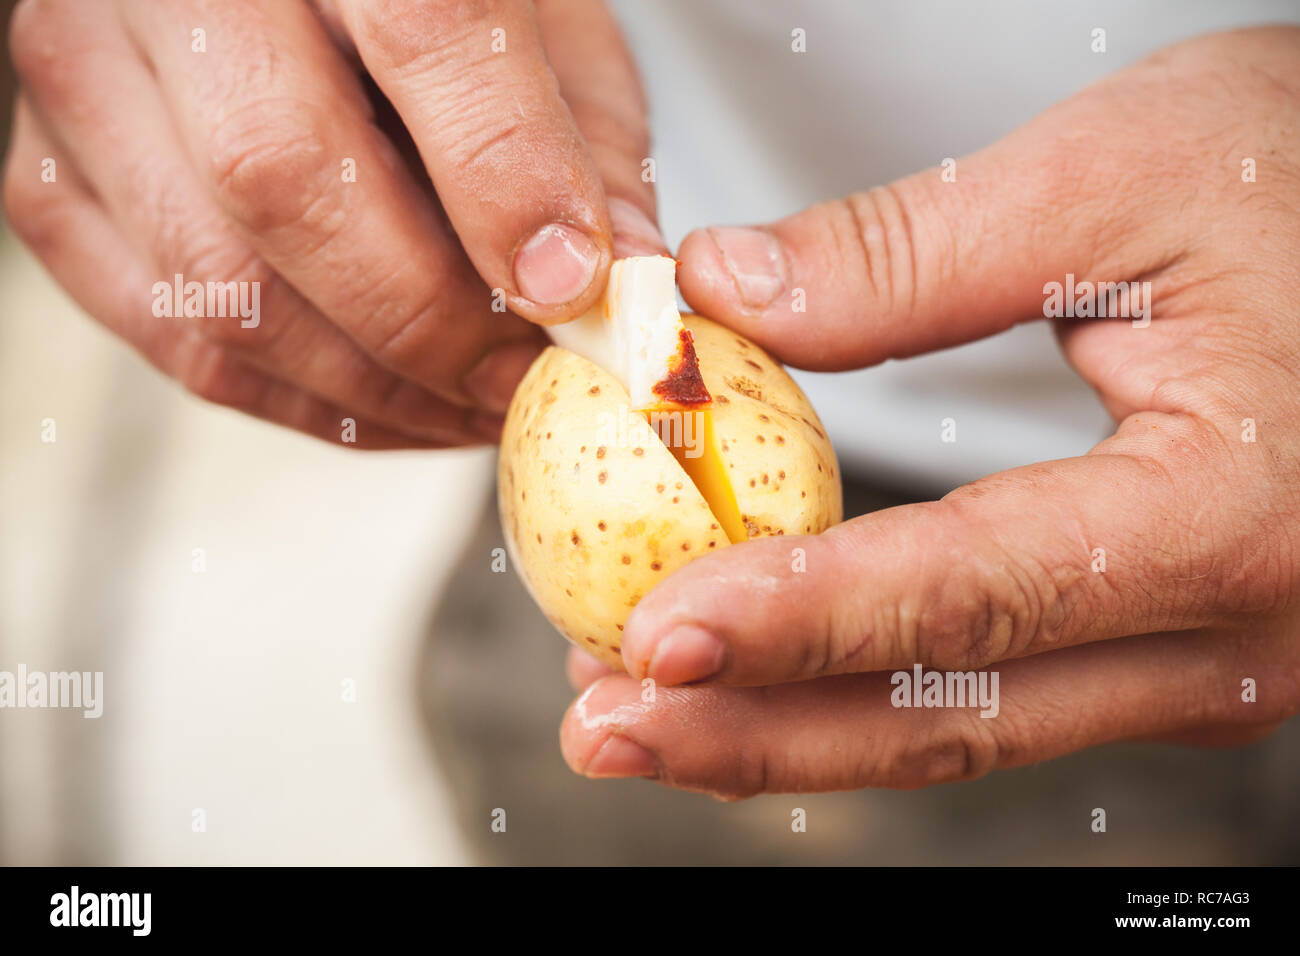 Stuffing potatoes with smoked lard, hands of cook close-up photo with selective focus Stock Photo